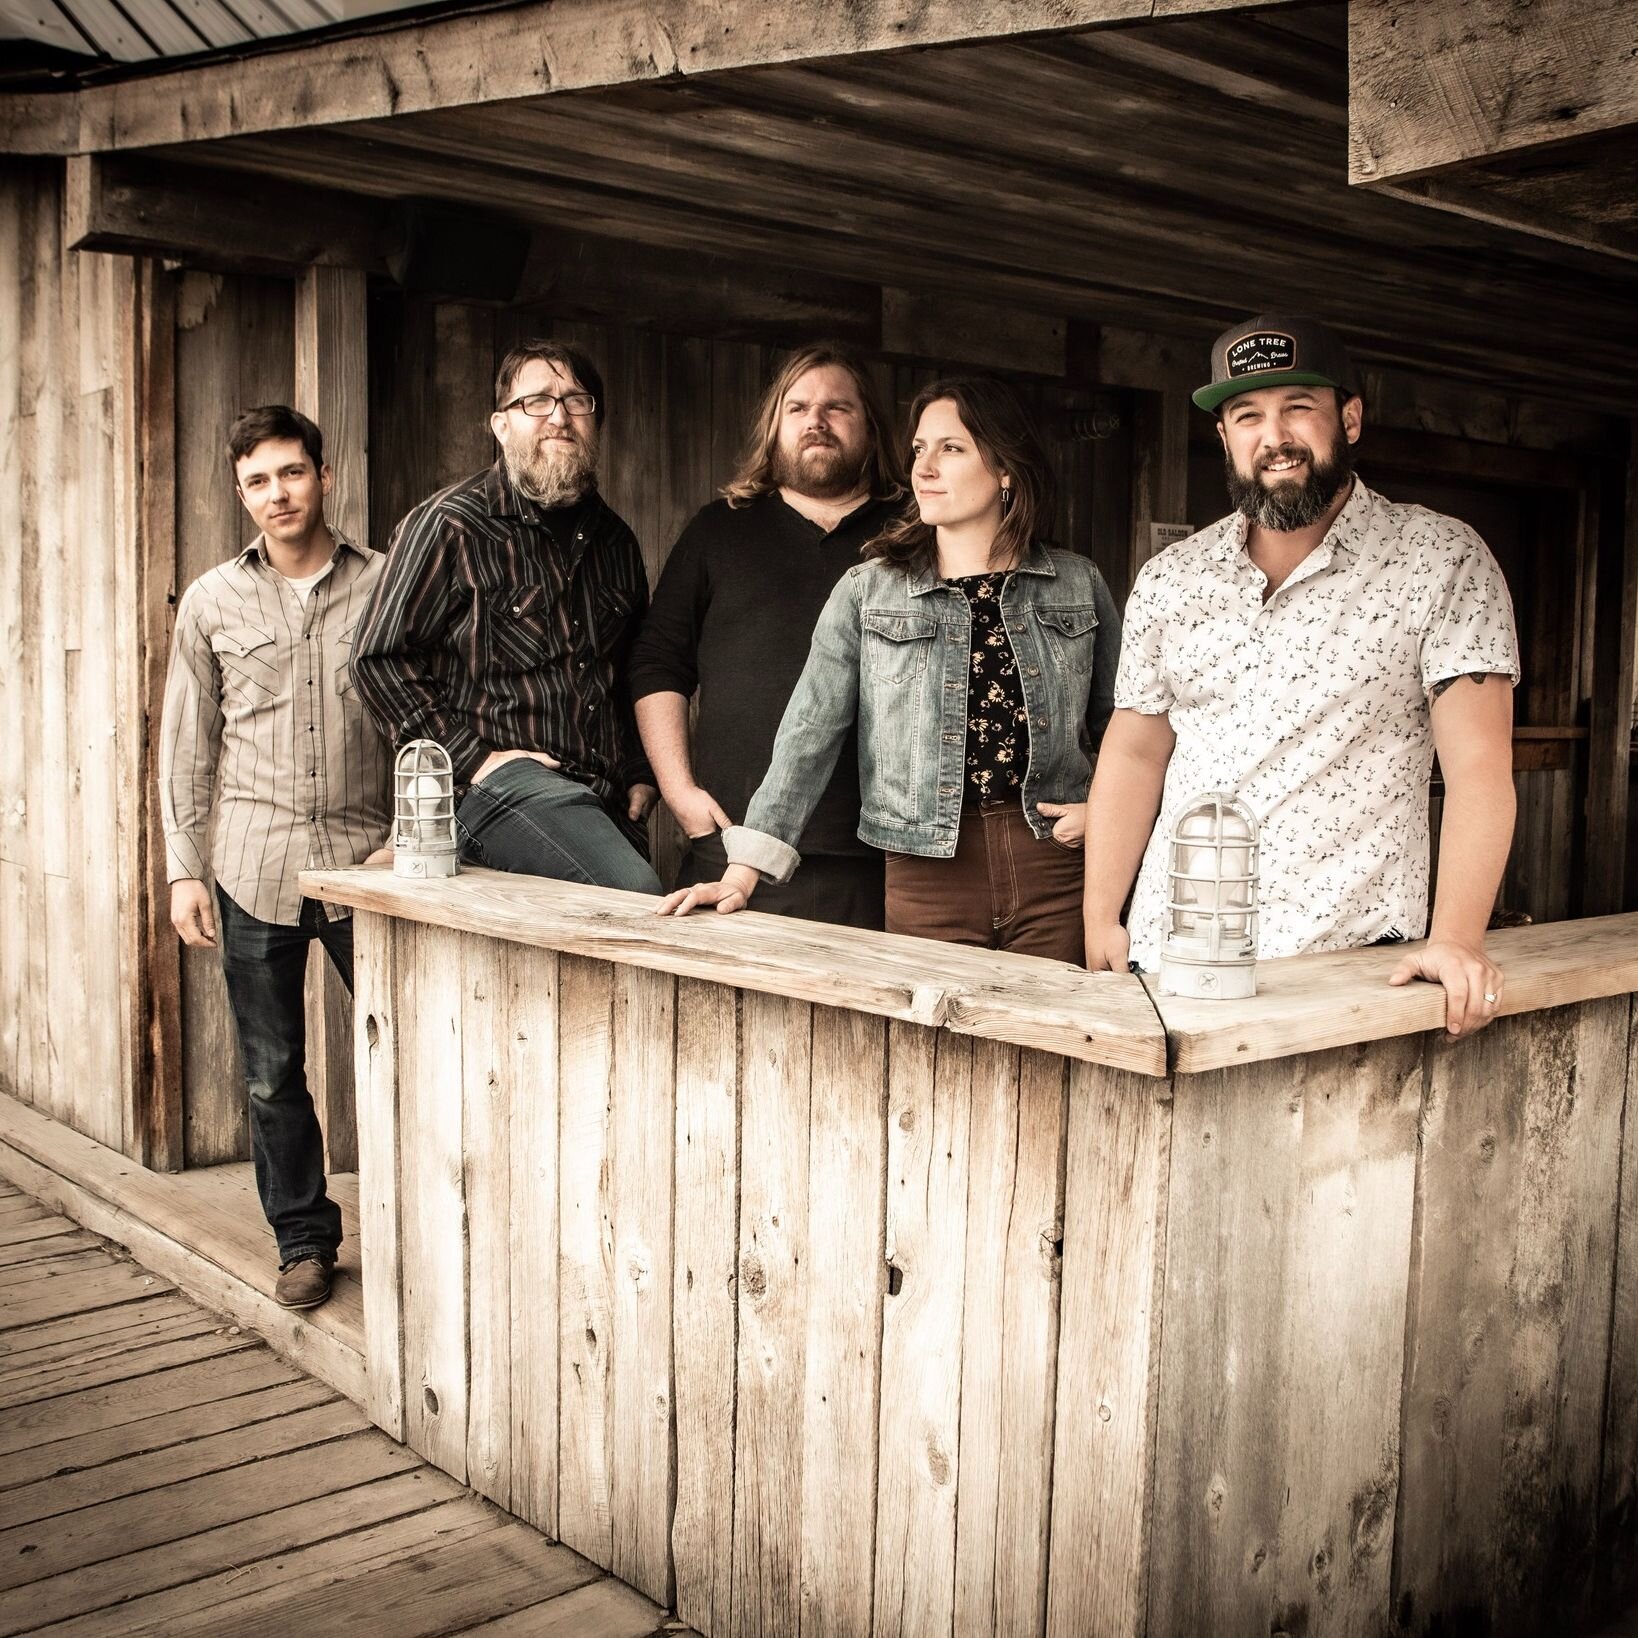 Laney Lou and the Bird Dogs will be joining us for our Wednesday Night Concert Series on July 12!

Laney Lou and the Bird Dogs are an energetic Americana band from Bozeman, Montana, that infuses four-part harmonies, engaging songwriting, and rock-n-r